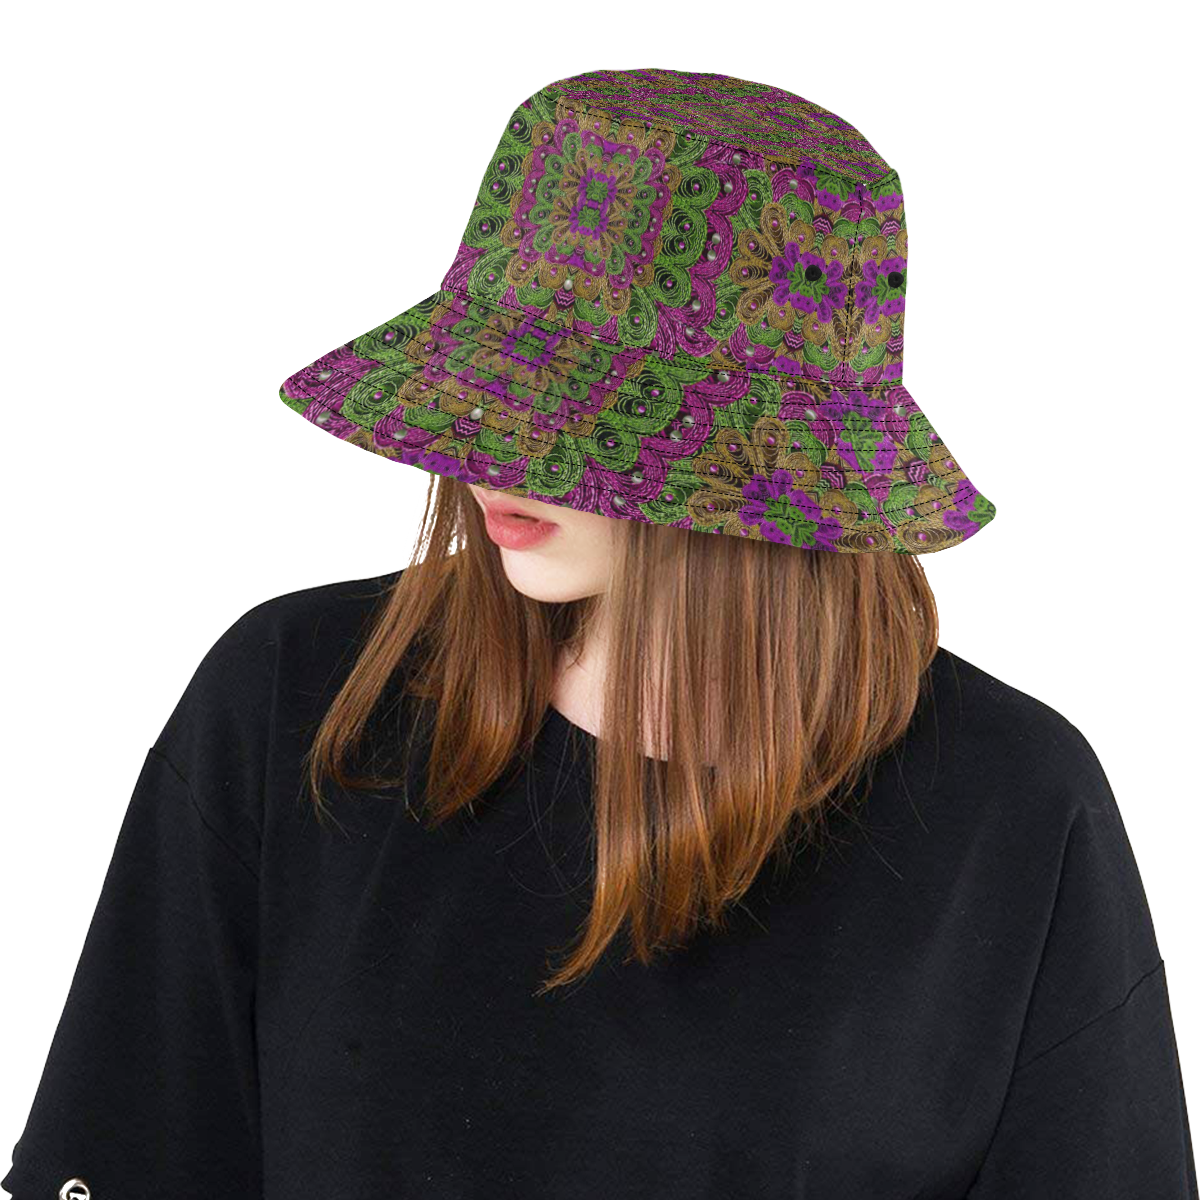 Peacock lace in the nature All Over Print Bucket Hat